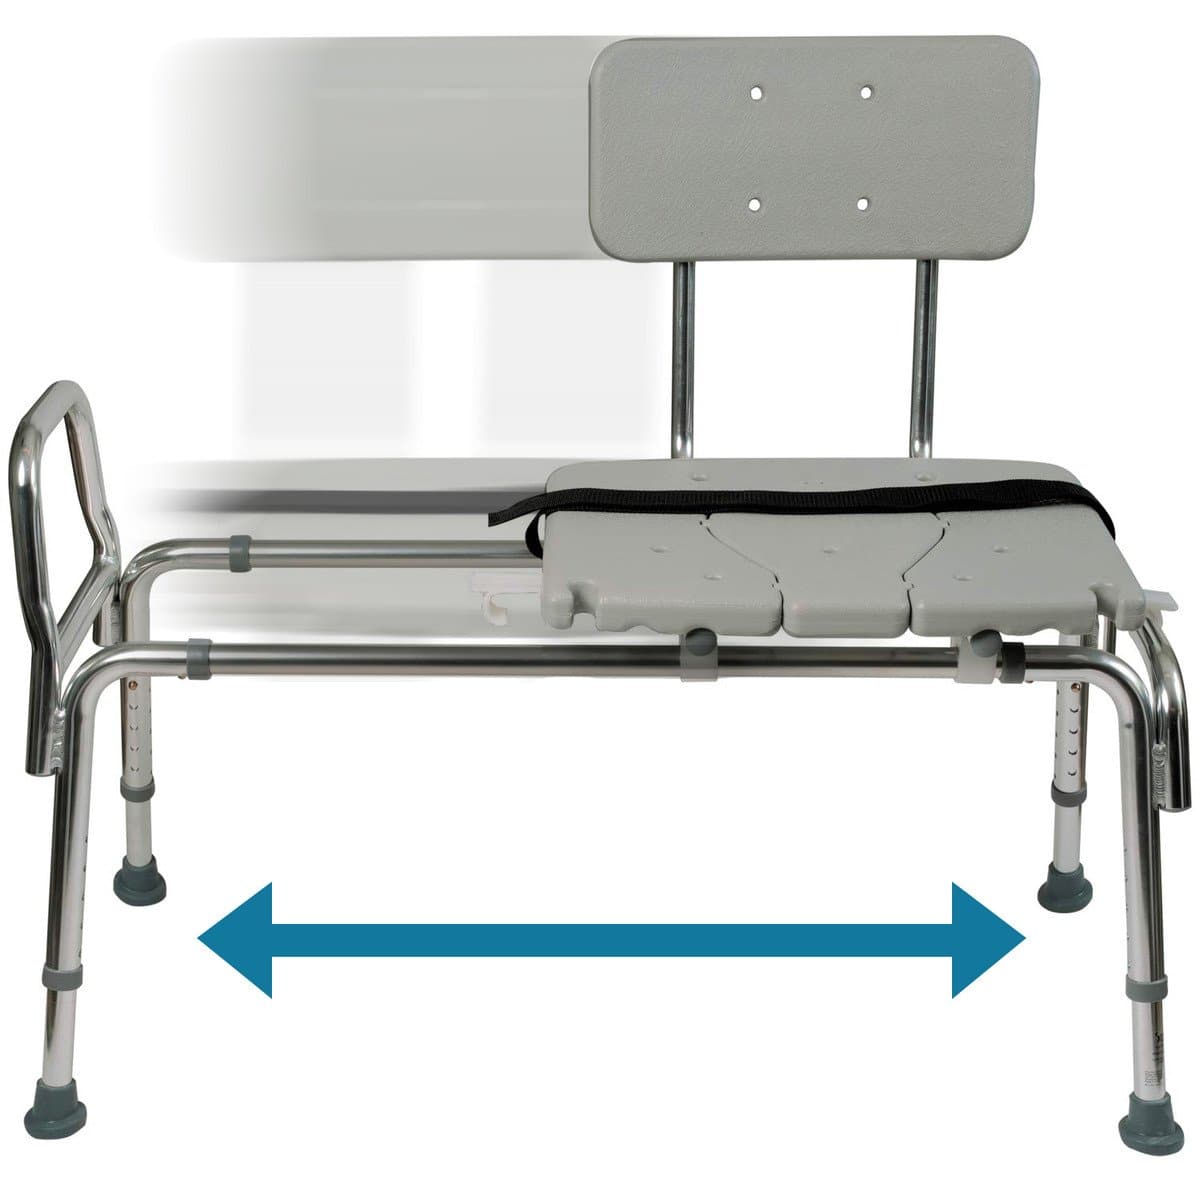 DMI® Sliding Bariatric Transfer Shower Bench with Cut-Out Seat - Senior.com Shower Benches